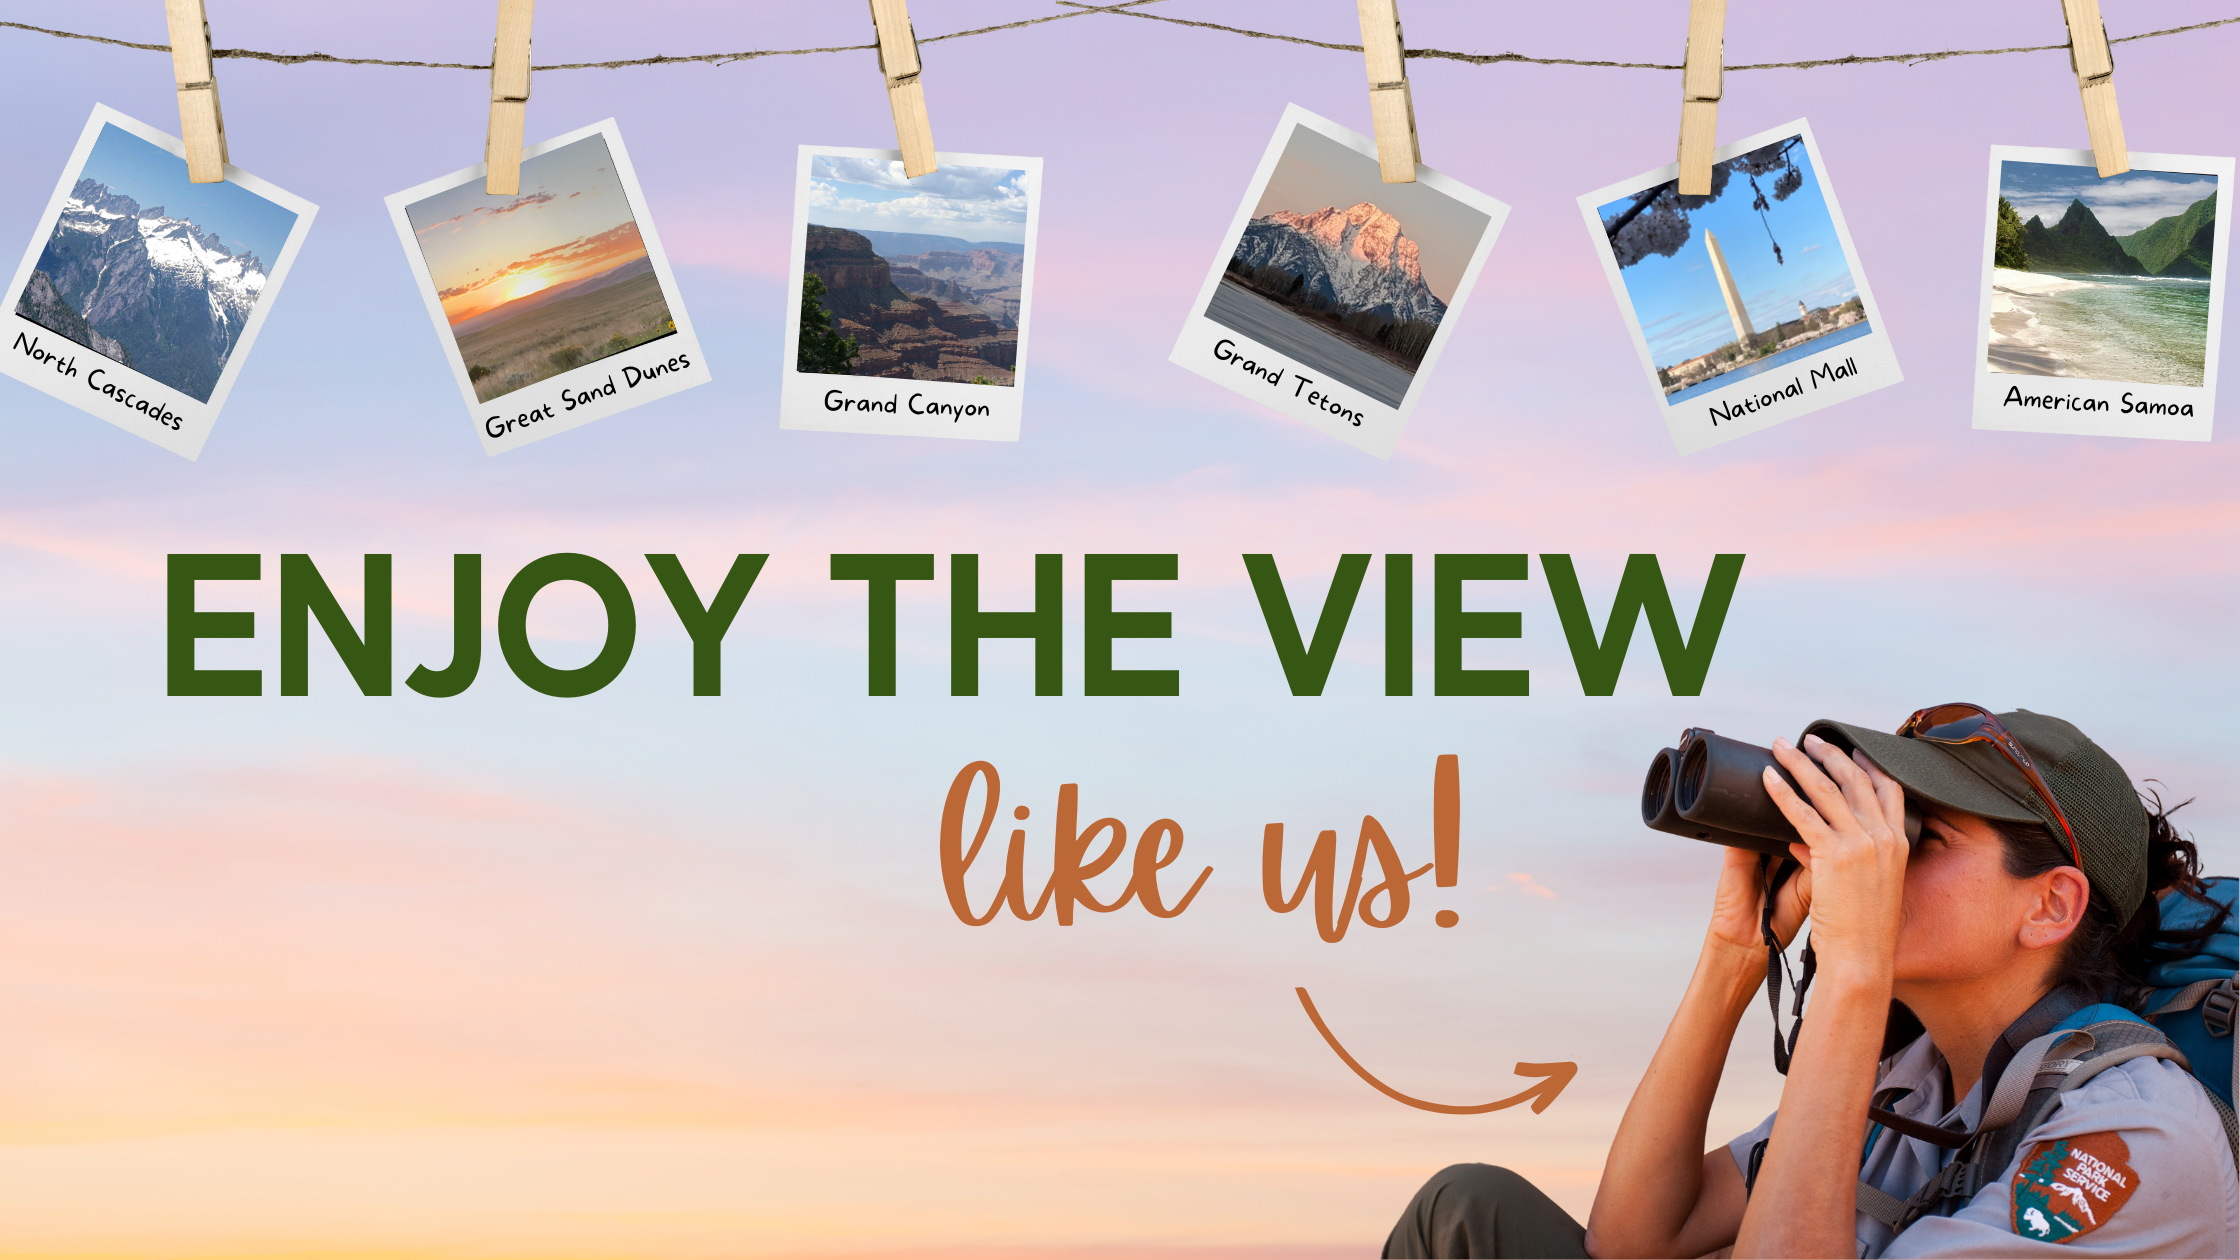 a graphic for "Enjoy the View Like Us" that features an image of a woman in an nps uniform with binoculars and polaroids of beautiful park views